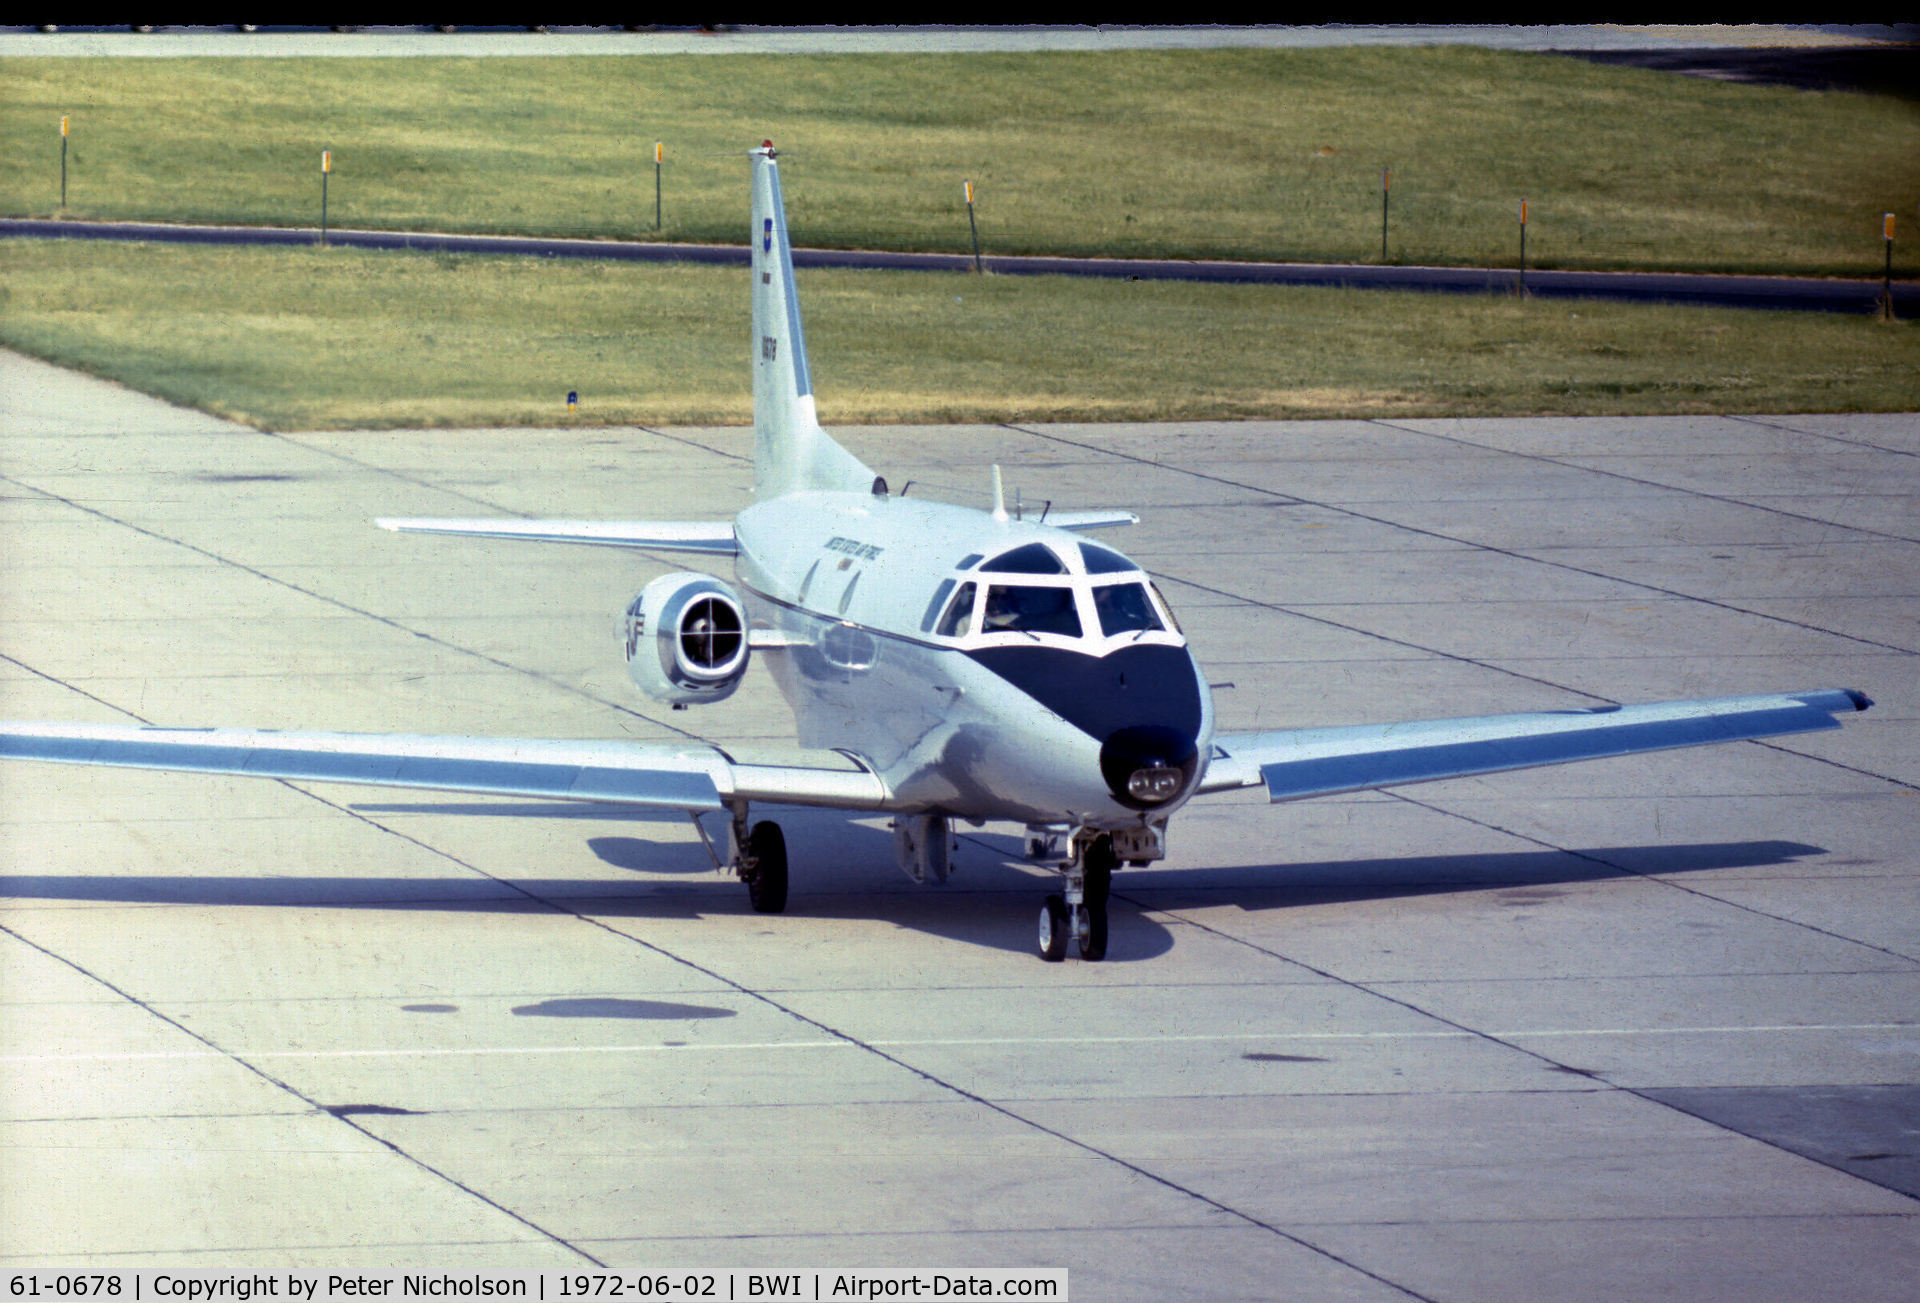 61-0678, 1961 North American CT-39A Sabreliner C/N 265-81, T-39A Sabreliner taxying to the terminal at Baltimore's Friendship Airport in the Summer of 1972. Can any-one tell me which unit she belonged to please?